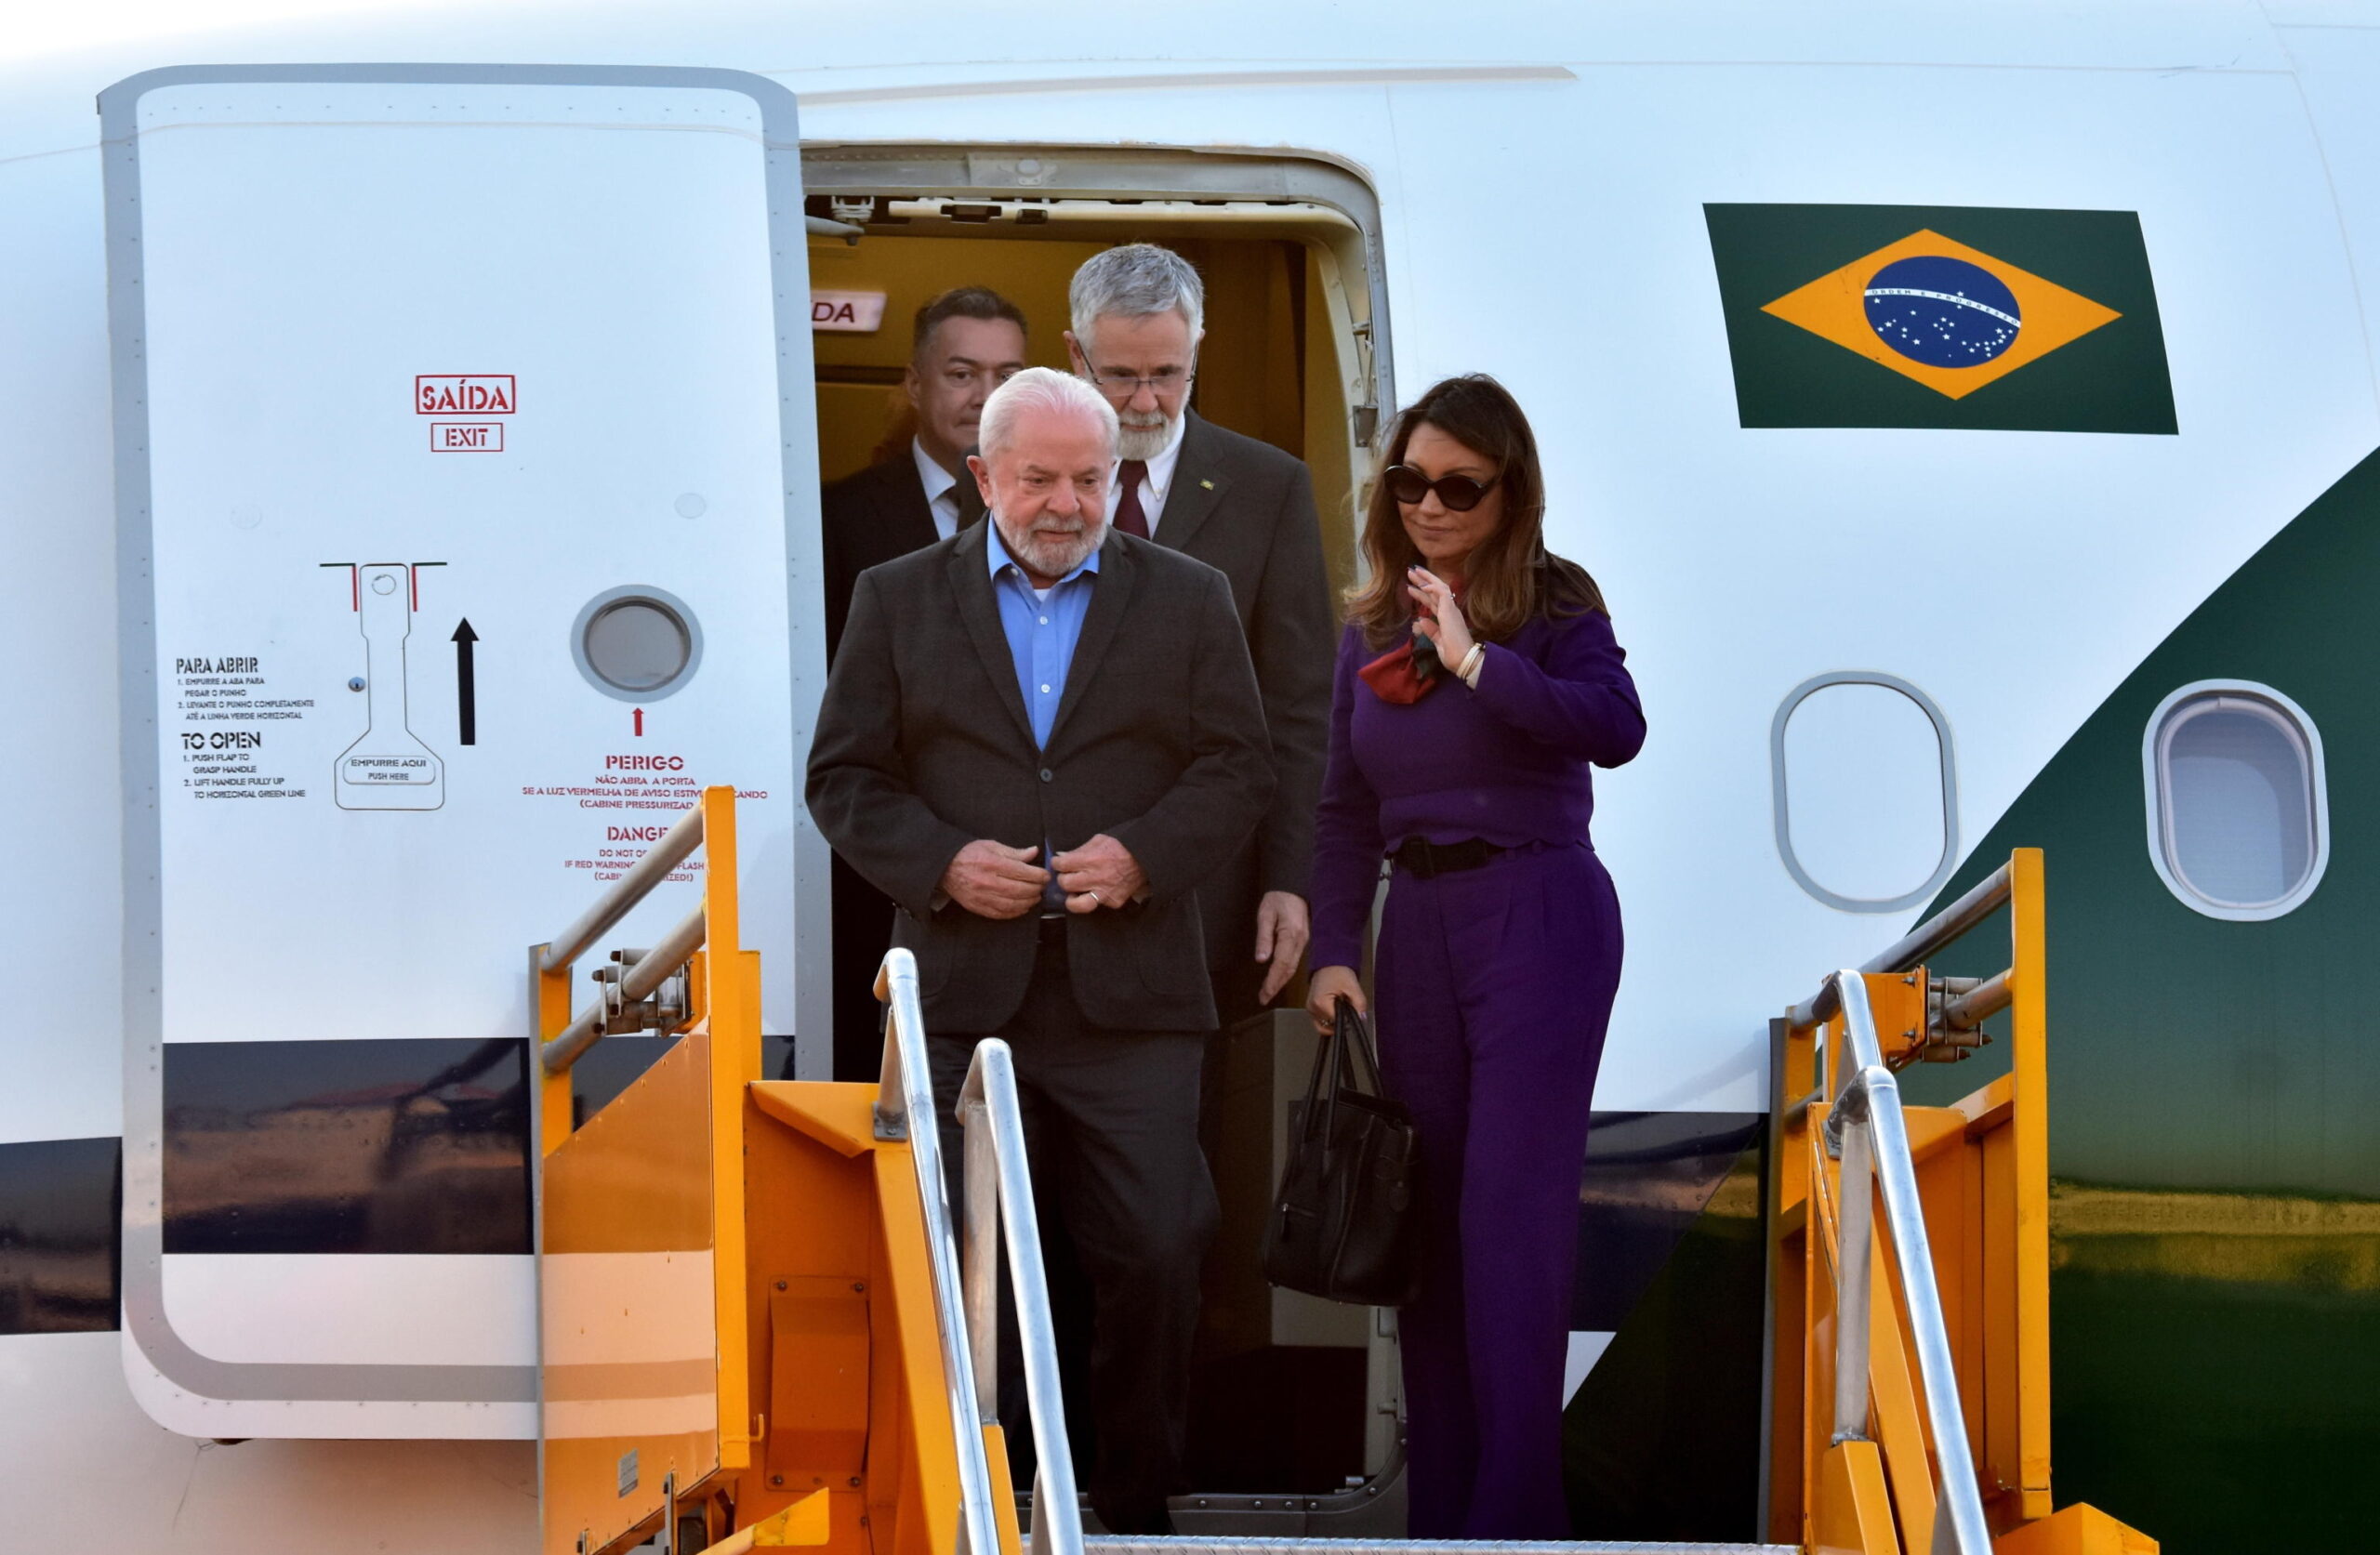 epa10800540 The President of Brazil, Luiz Inacio Lula da Silva (L), accompanied by his wife, Rosangela da Silva (R) arrive at Silvio Pettirossi International Airport, in Luque, Paraguay, 14 August 2023. Lula da Silva arrived in Paraguay to participate in the investiture of Santiago Pena as the new President of Paraguay. In addition, according to his official agenda, he will also hold a private meeting with former President and Senator Fernando Lugo (2008-2012), who is recovering from a cardiovascular accident he suffered in August of last year.  EPA/Daniel Piris